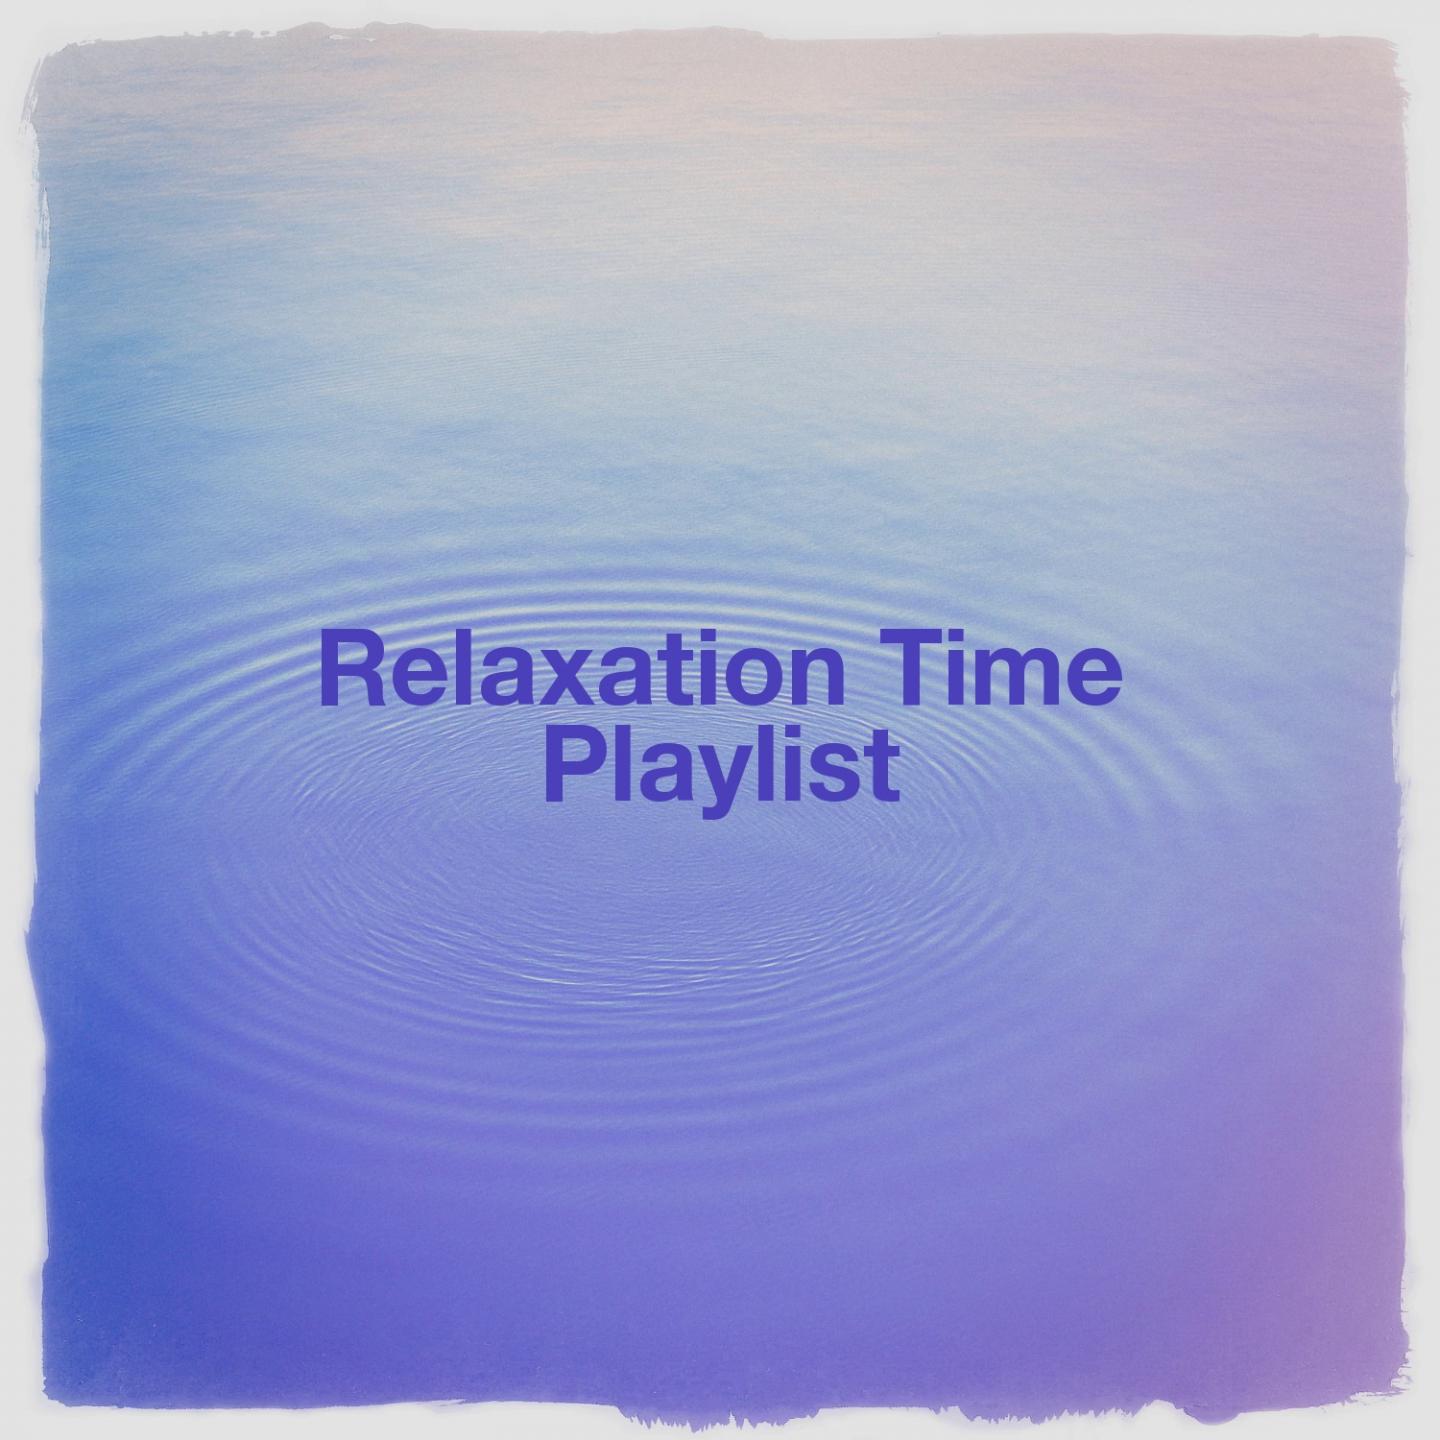 Relaxation Time Playlist